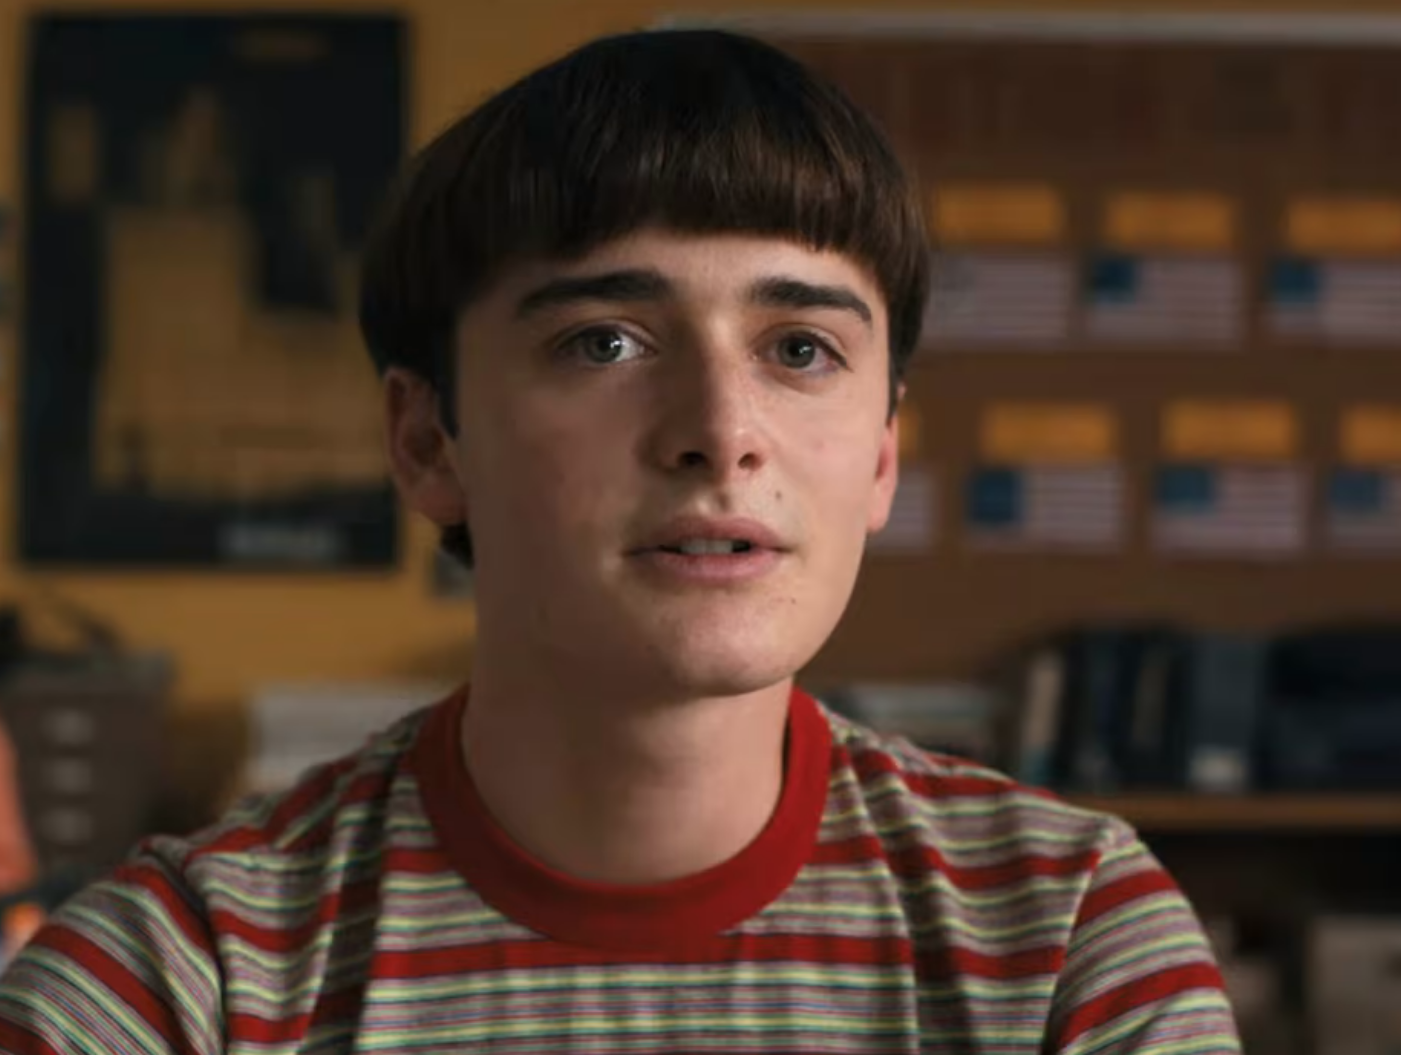 A close-up of Will Byers in a short-sleeved striped shirt